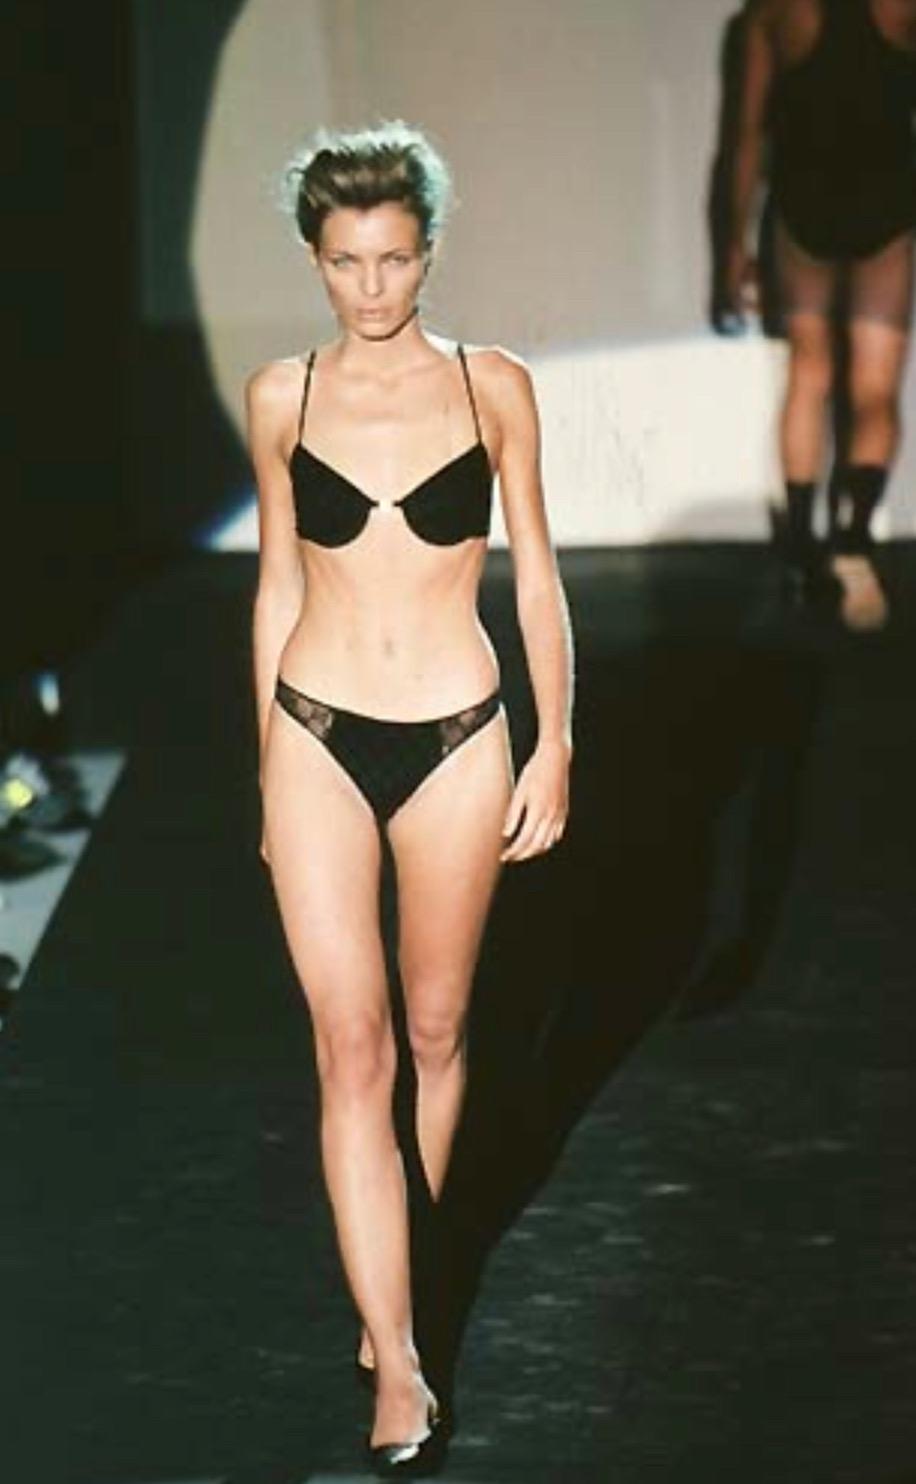 Presenting a fabulous black Gucci 'G' logo bra, designed by Tom Ford. From the Spring/Summer 1998 collection, this stunning bralette debuted on the season's runway and was as seen on early 2000s rapper Vita. This bra is made complete with a square